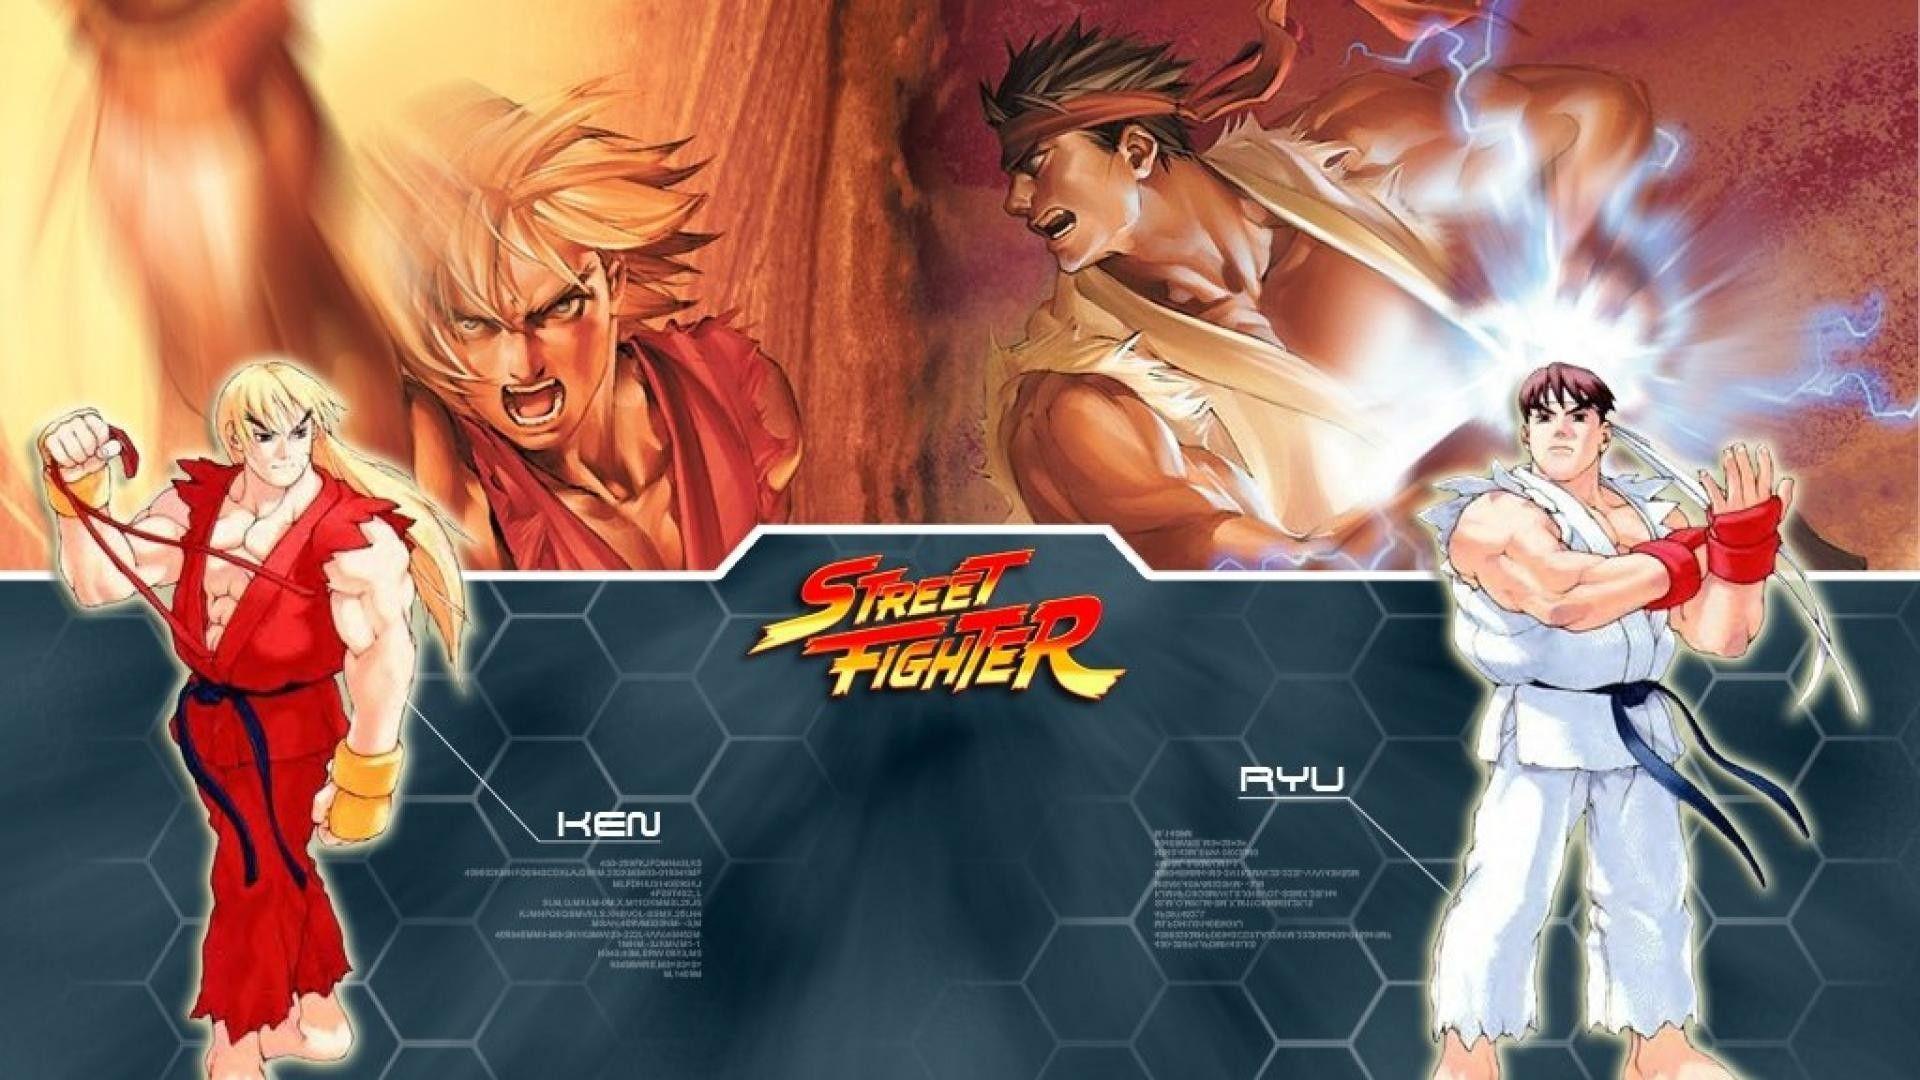 Street Fighter HD Wallpaper background picture